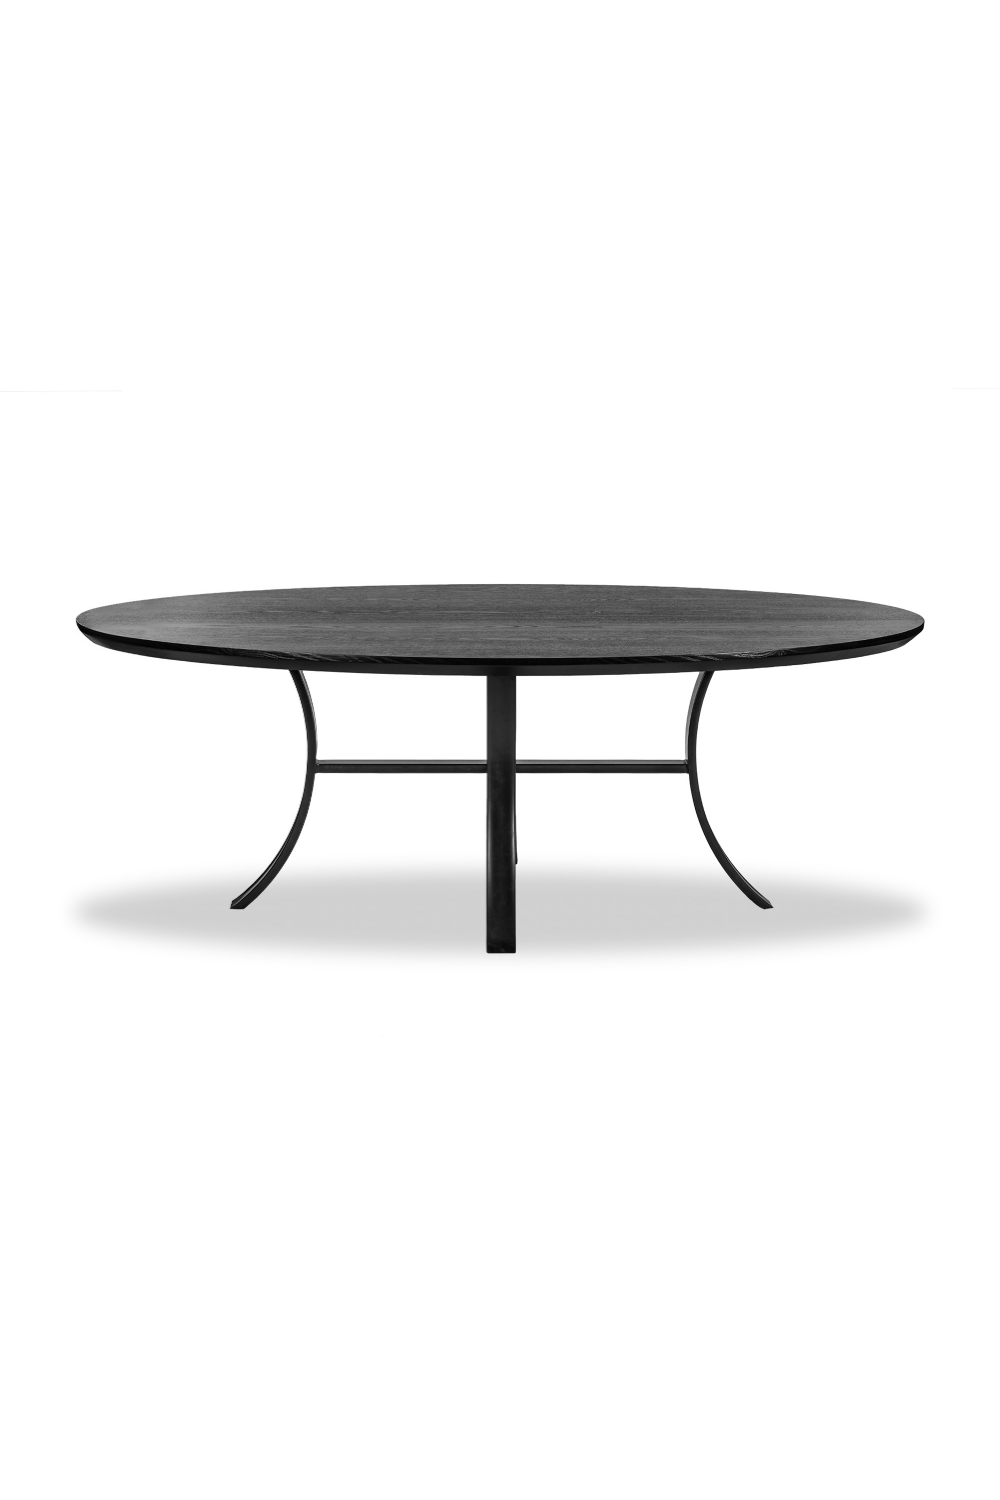 Black Wooden Oval Dining Table | Liang & Eimil Isola | Oroa.com